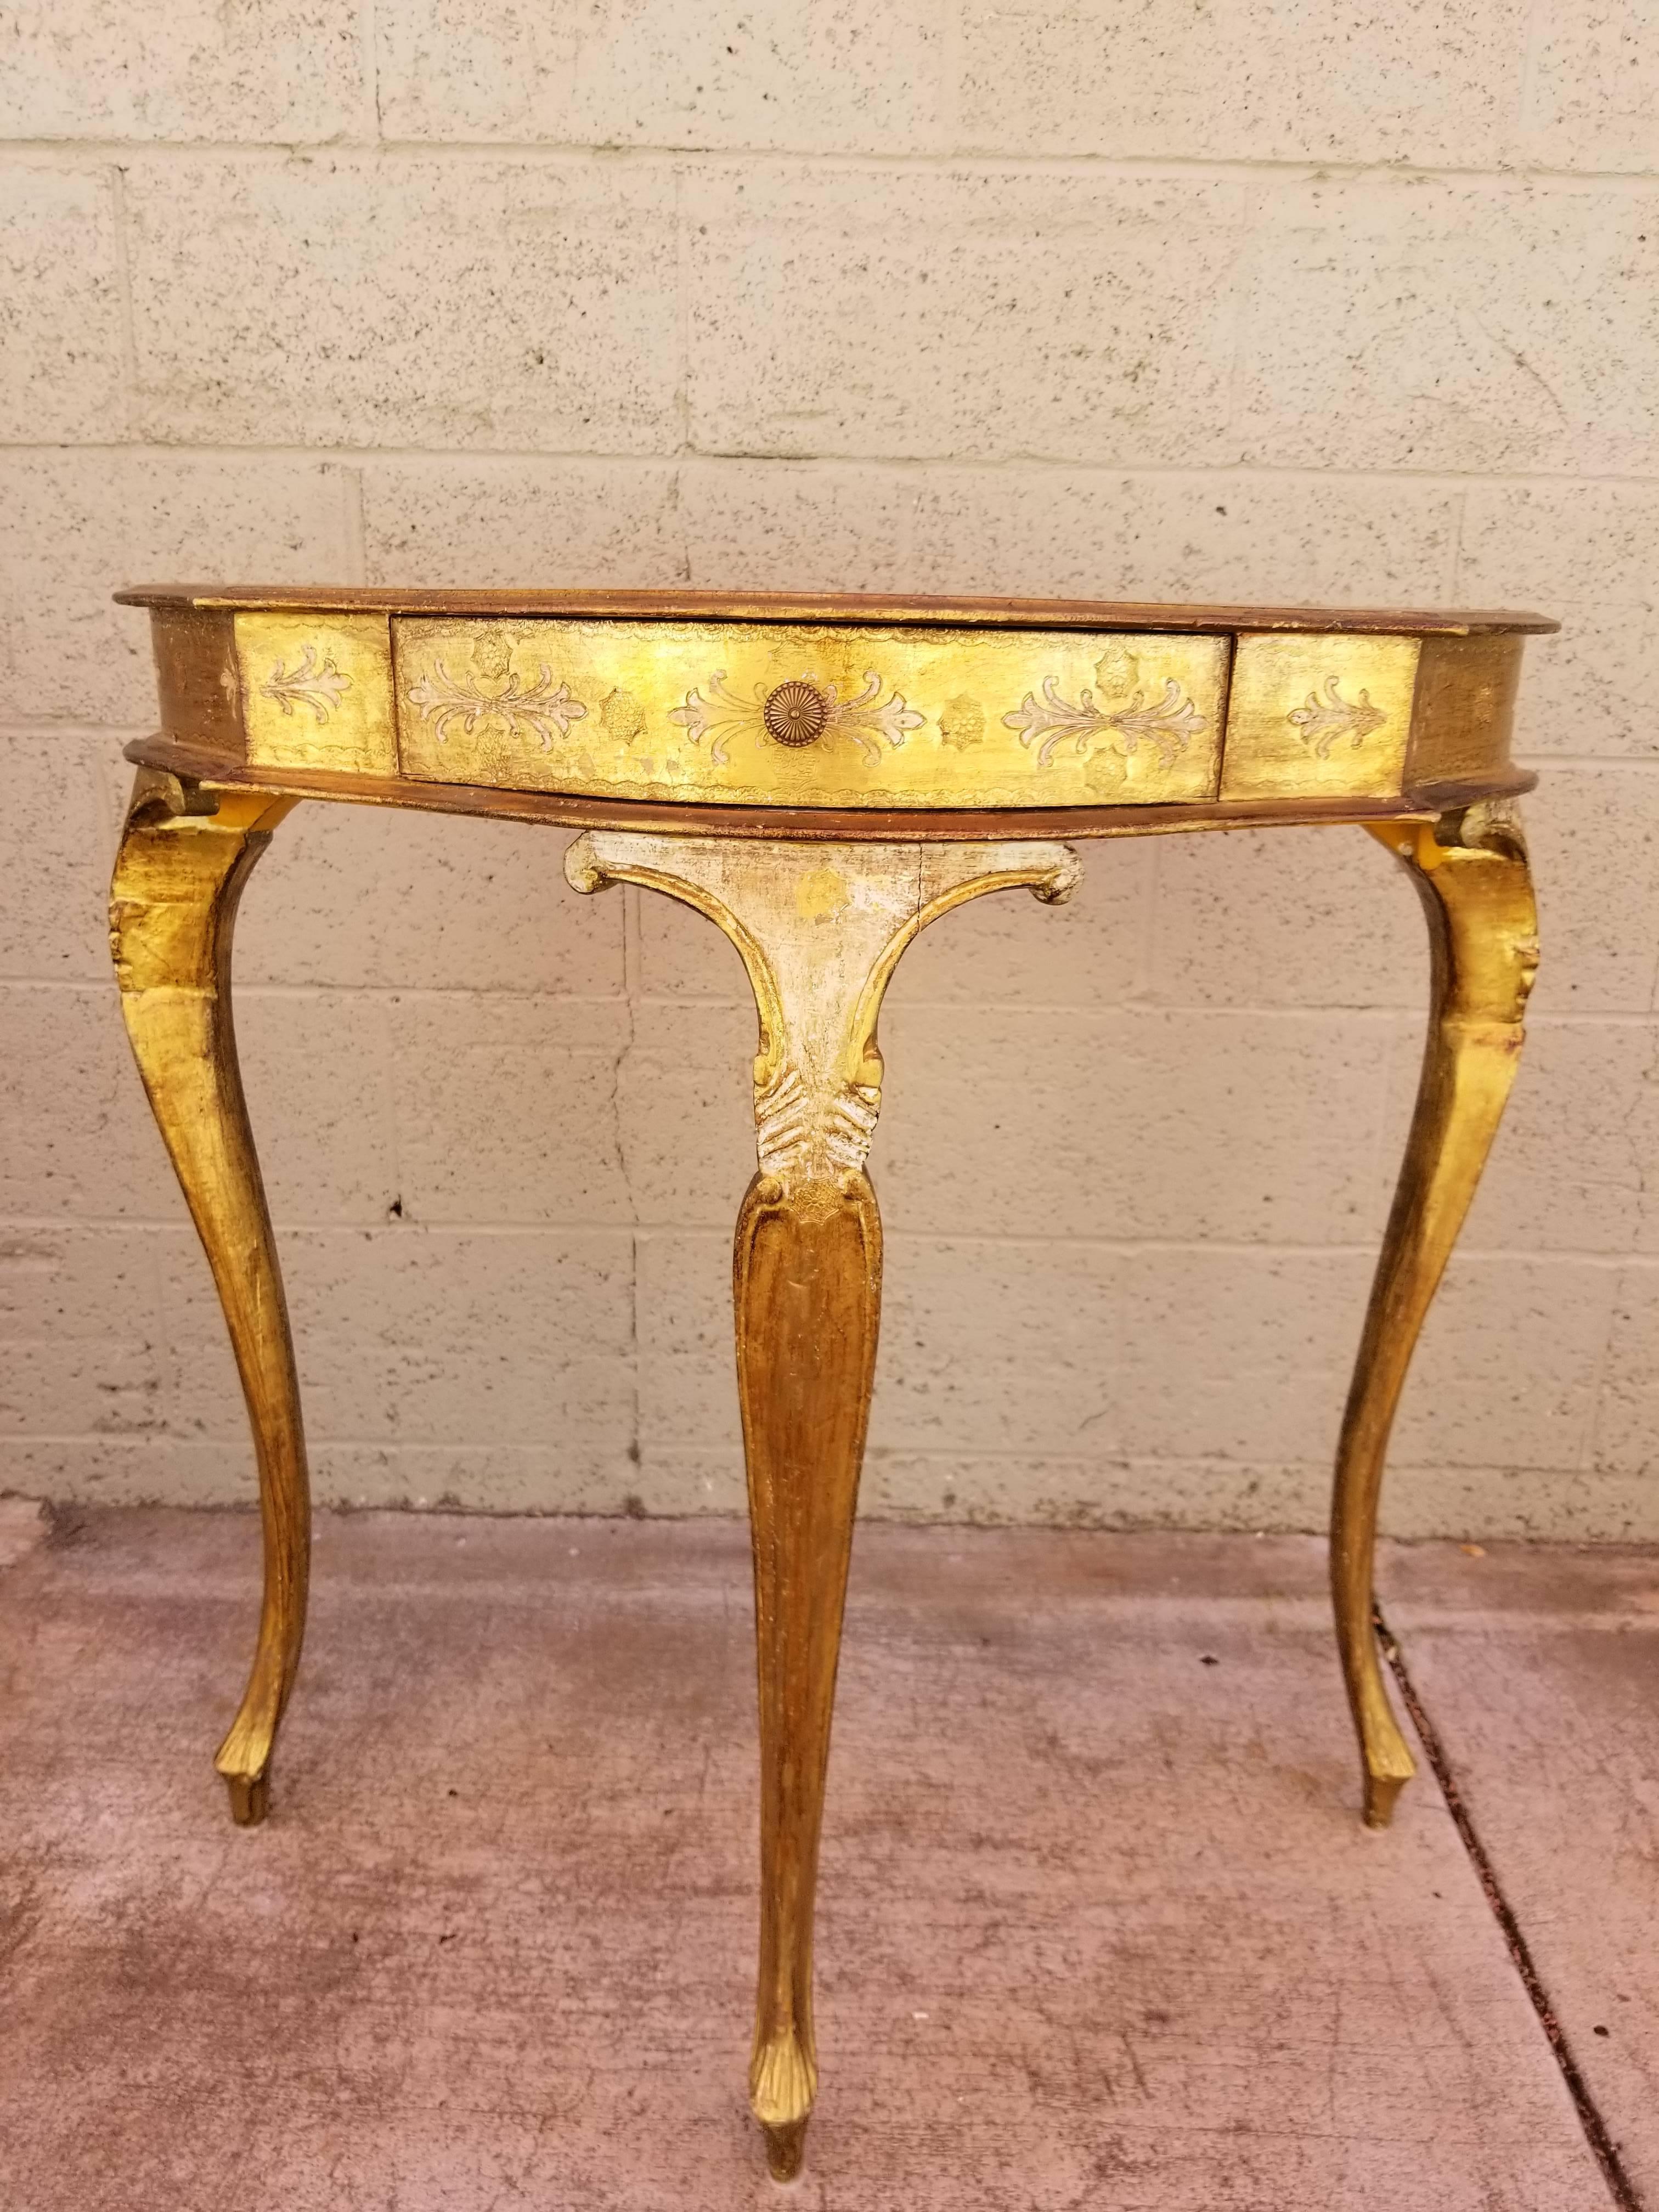 Venetian demilune table with center drawer. Original painted and lacquered surface.